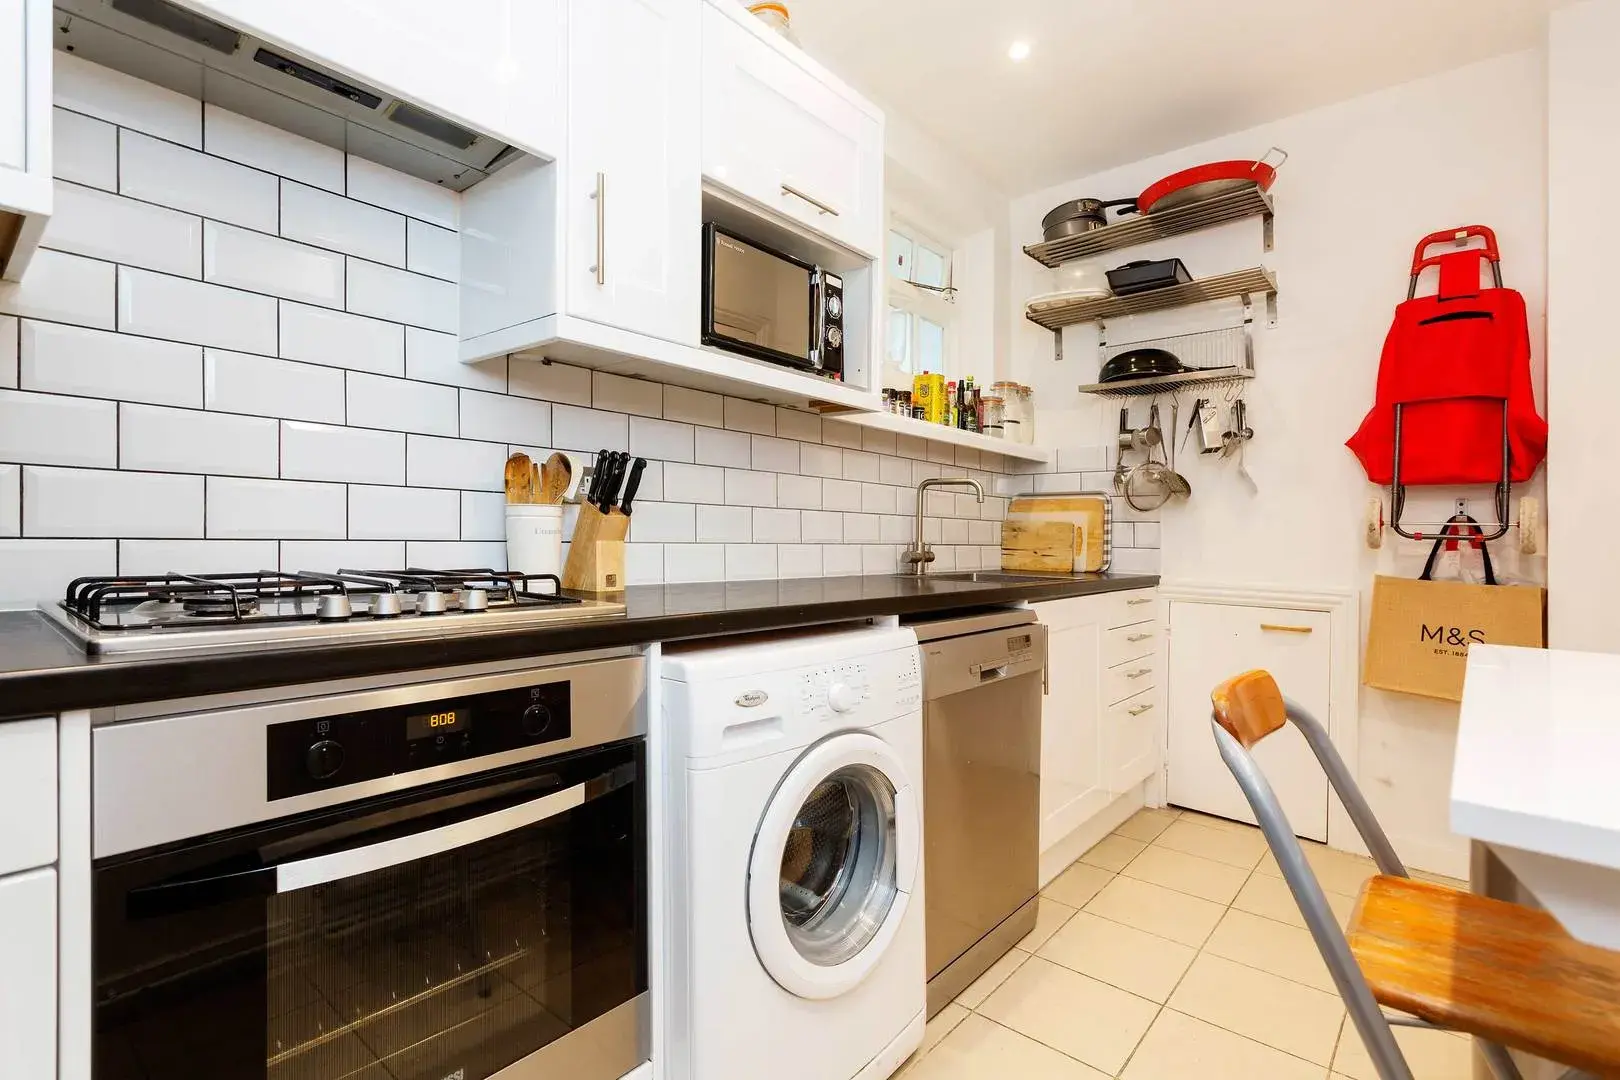 Osten Mews, holiday home in South Kensington, London